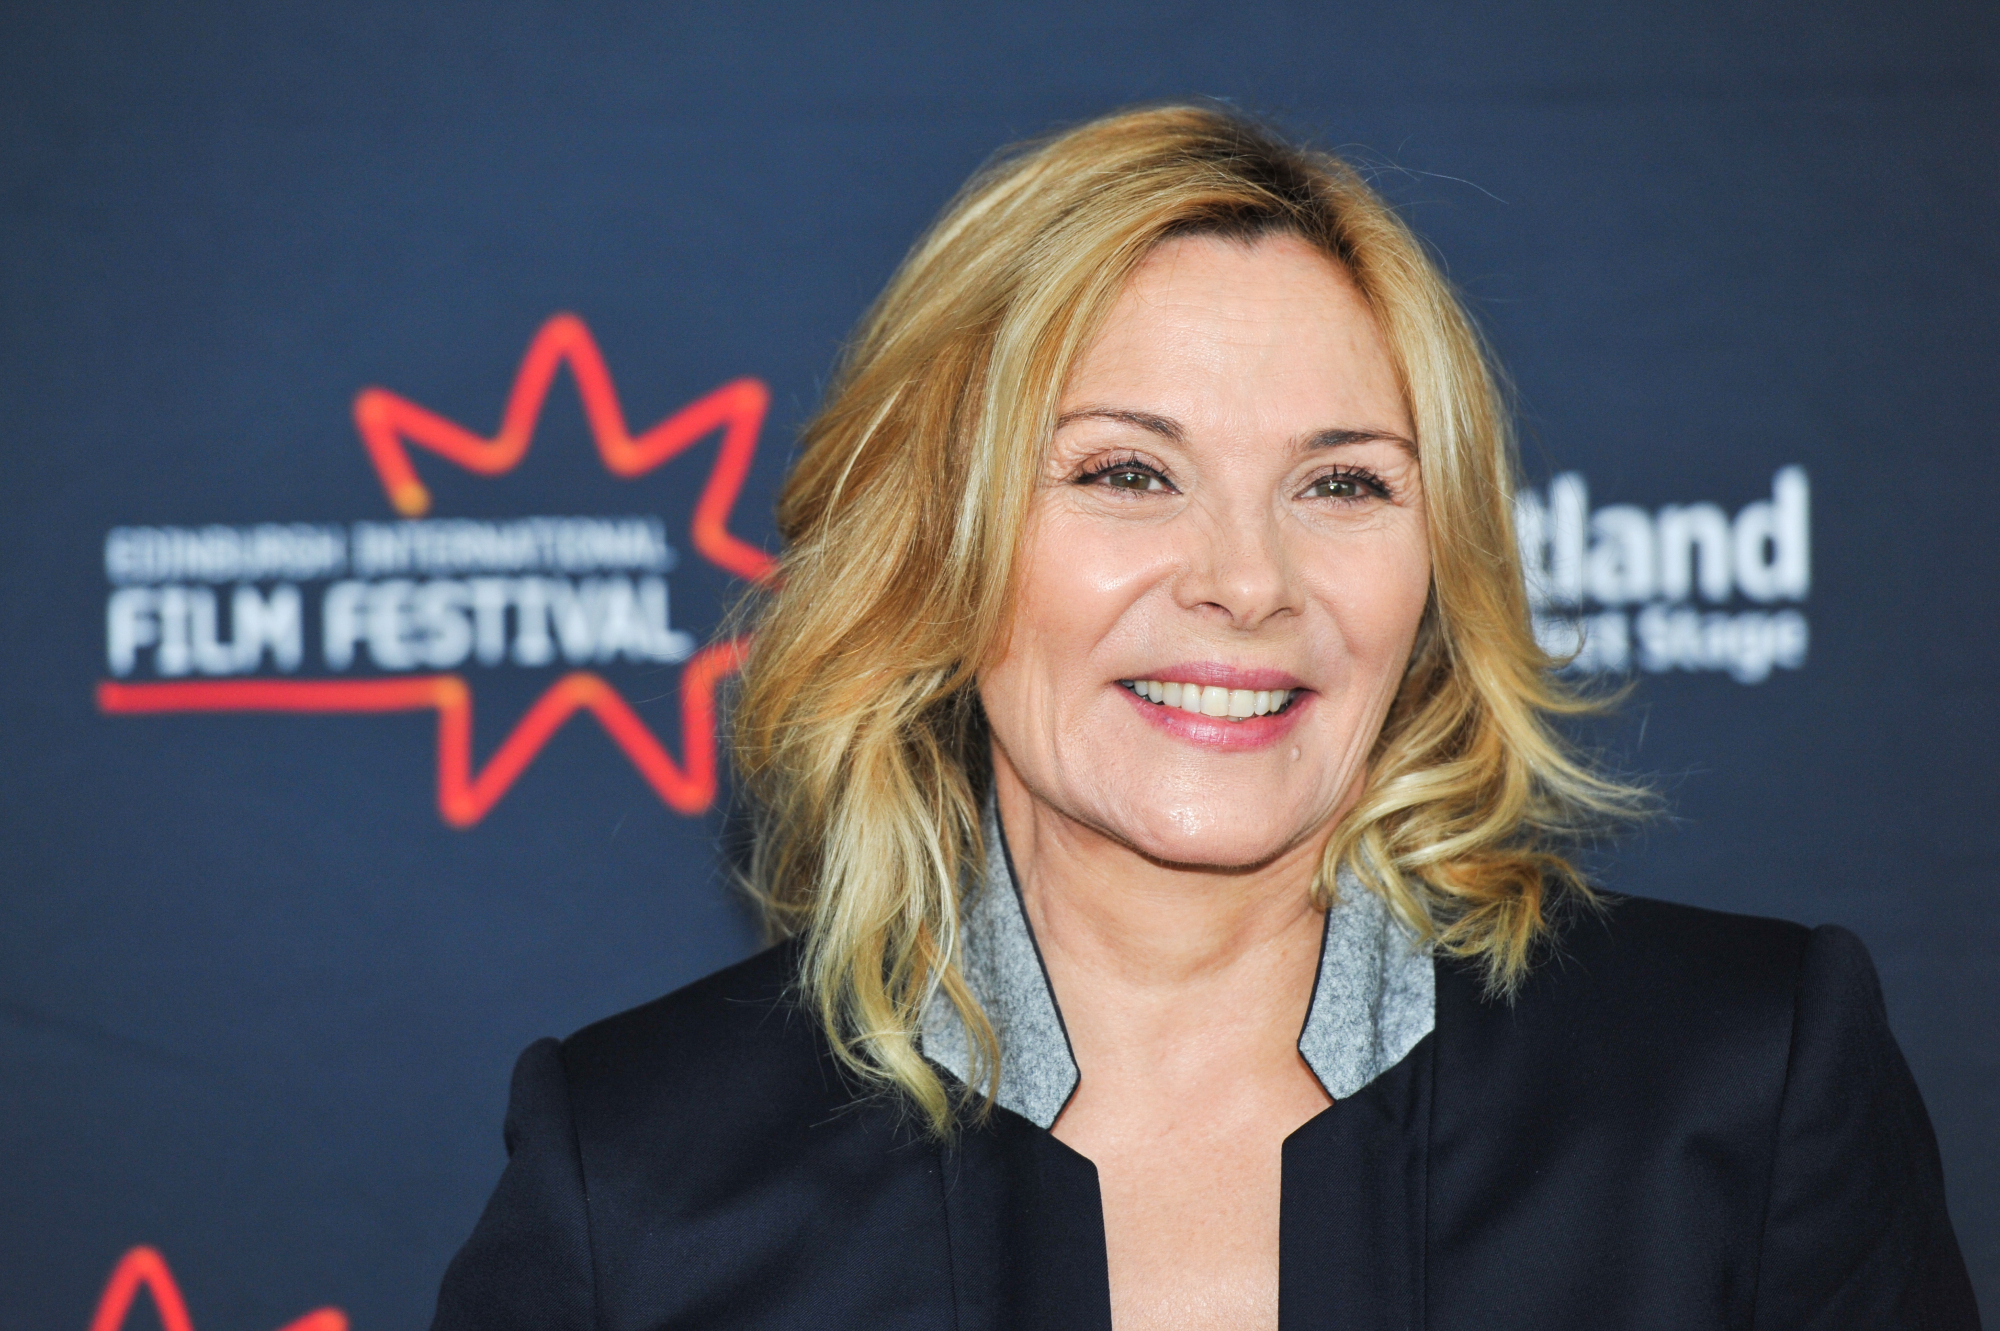 'Porky's' star Kim Cattrall smiling in a black jacket in front of a film festival step and repeat